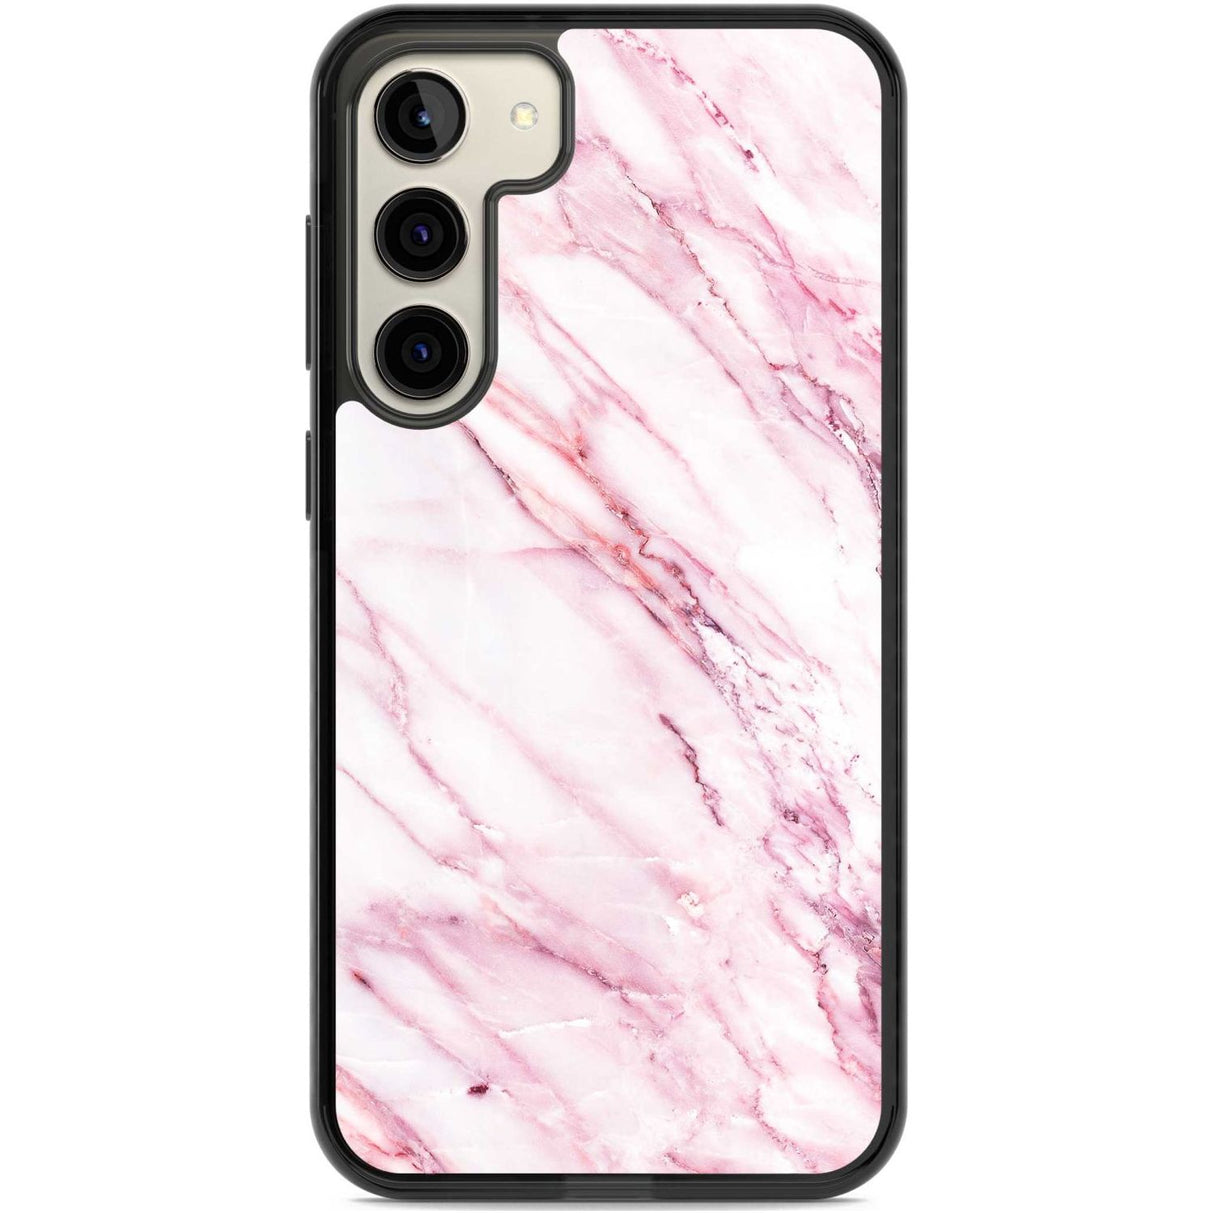 White & Pink Onyx Marble Texture